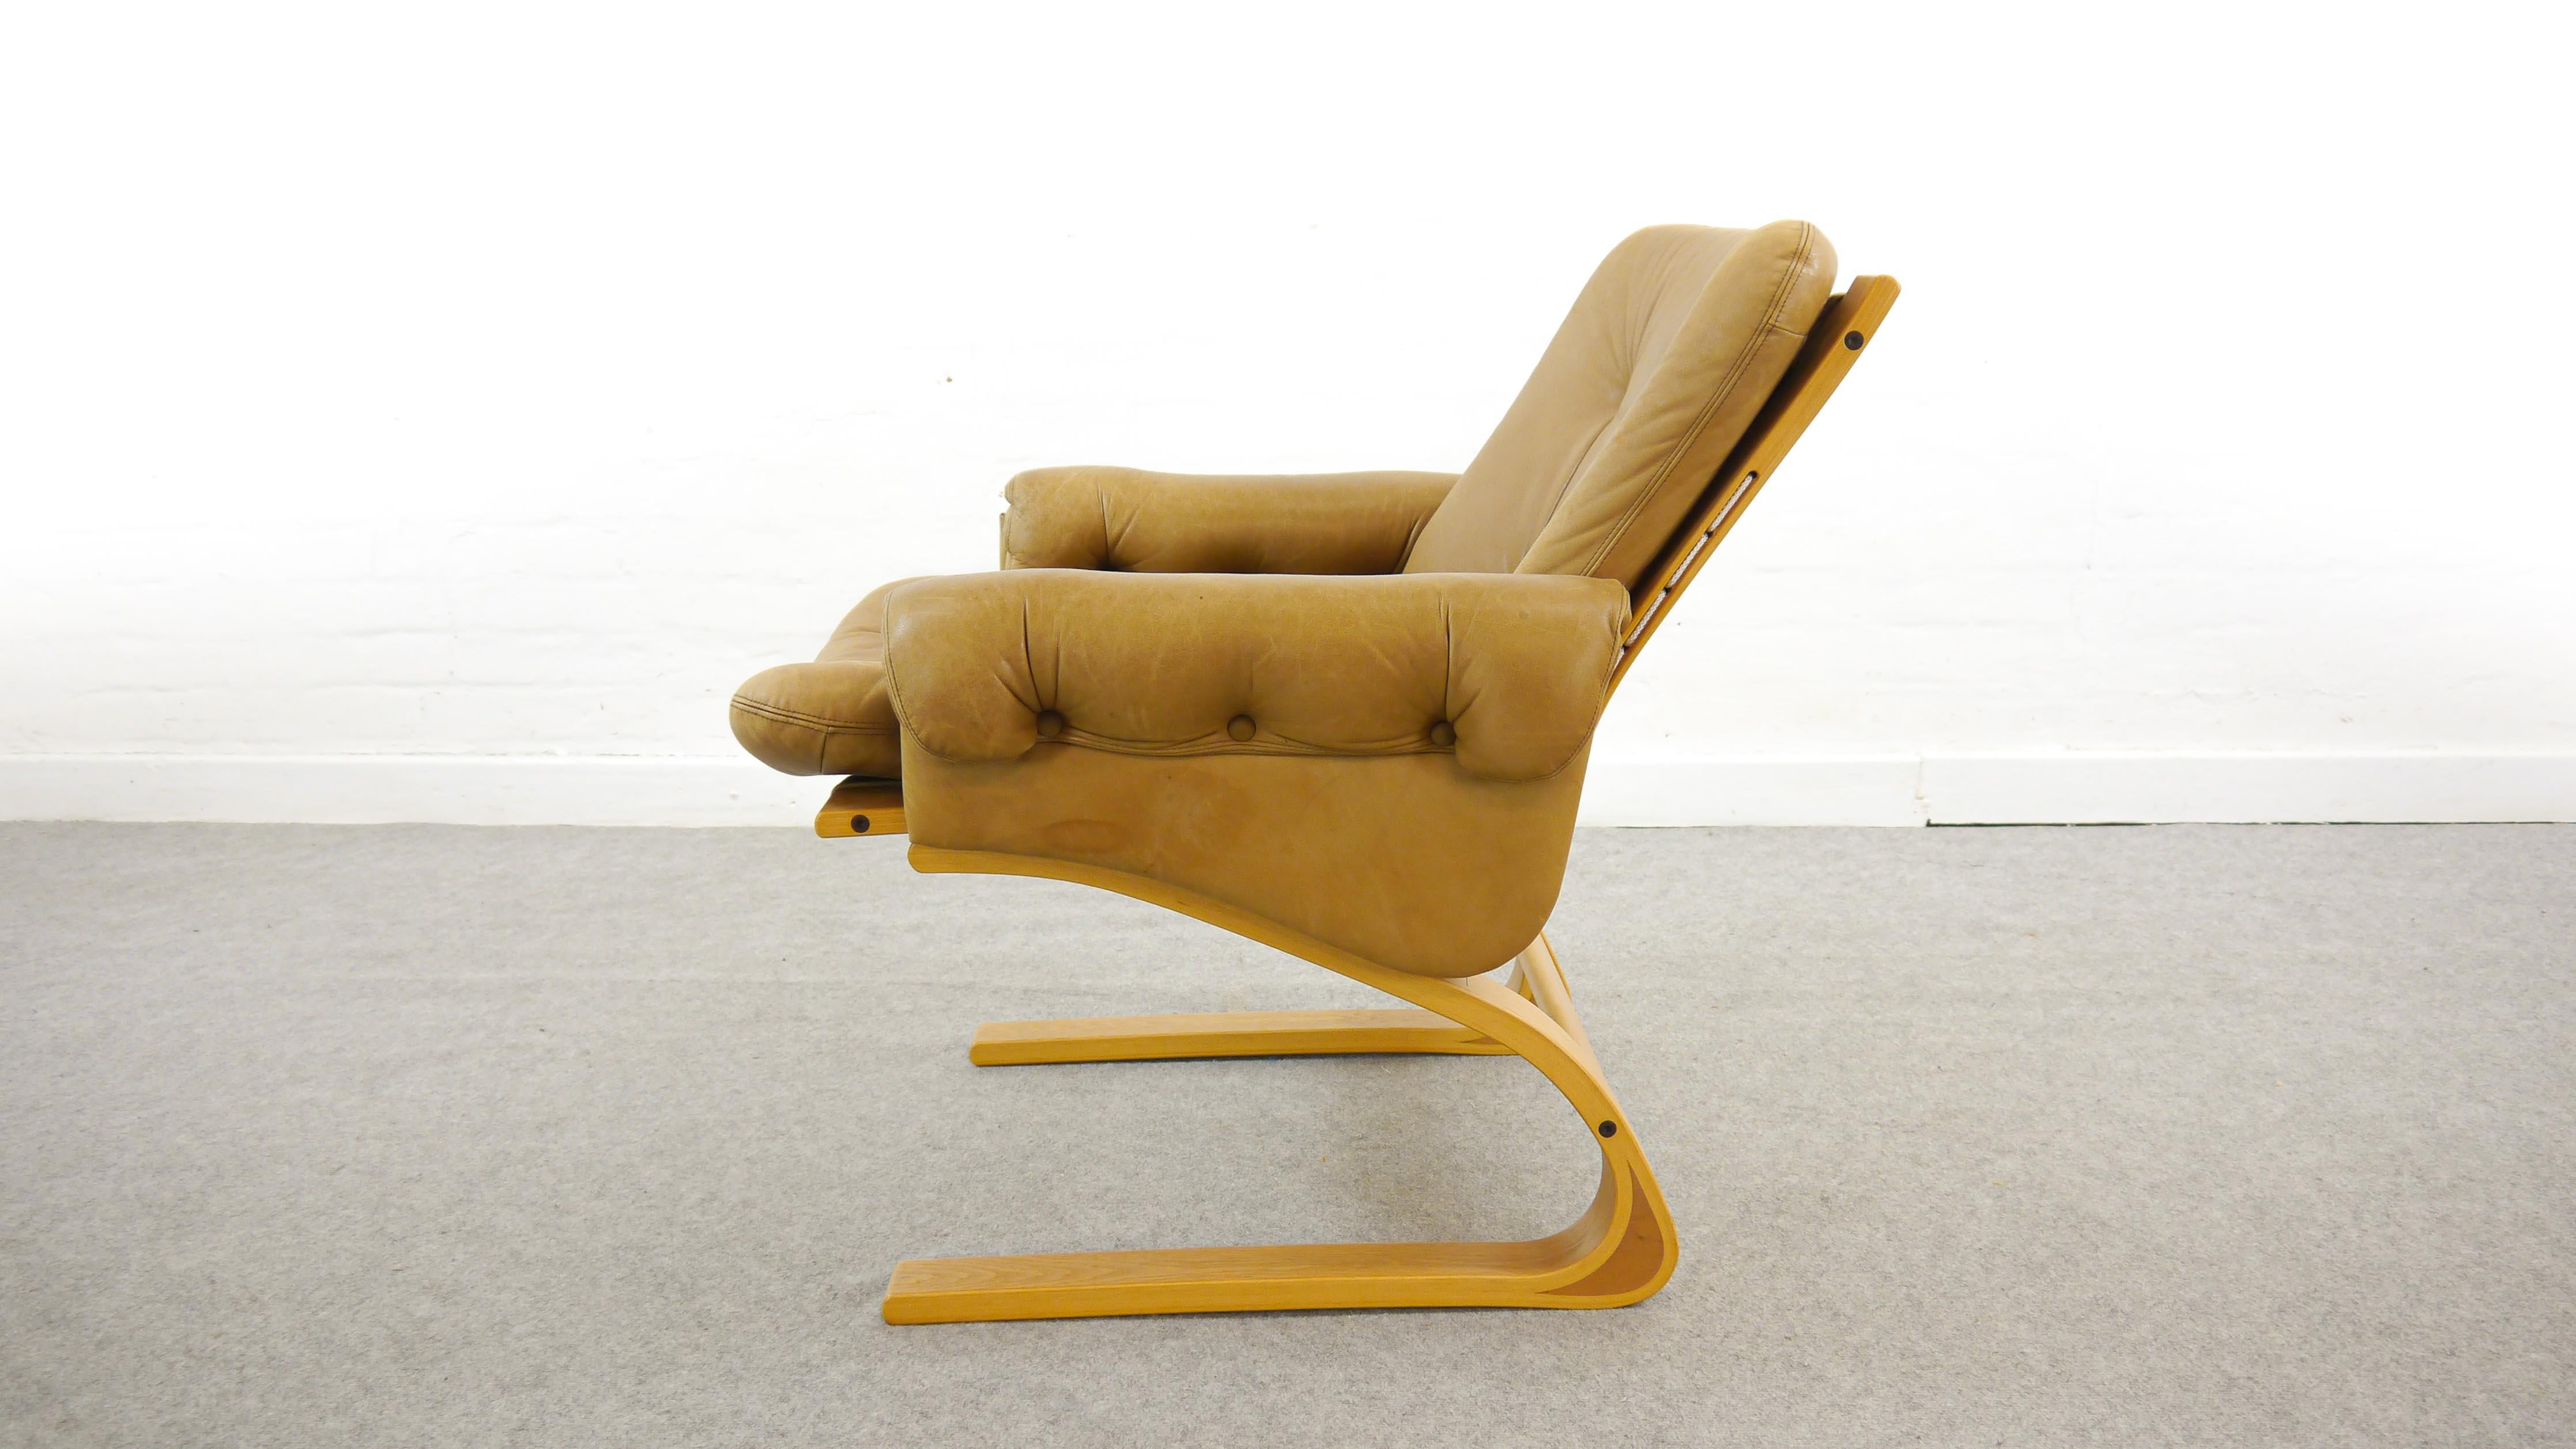 Kengu lounge chair by Elsa and Nordahl Solheim. Manufactured by Rybo Rykken & Co., Norway, 1970s. Upholstered in original brown or caramel leather. Cantilevered construction in wood with canvas and leather. Very comfortable. Good used condition.